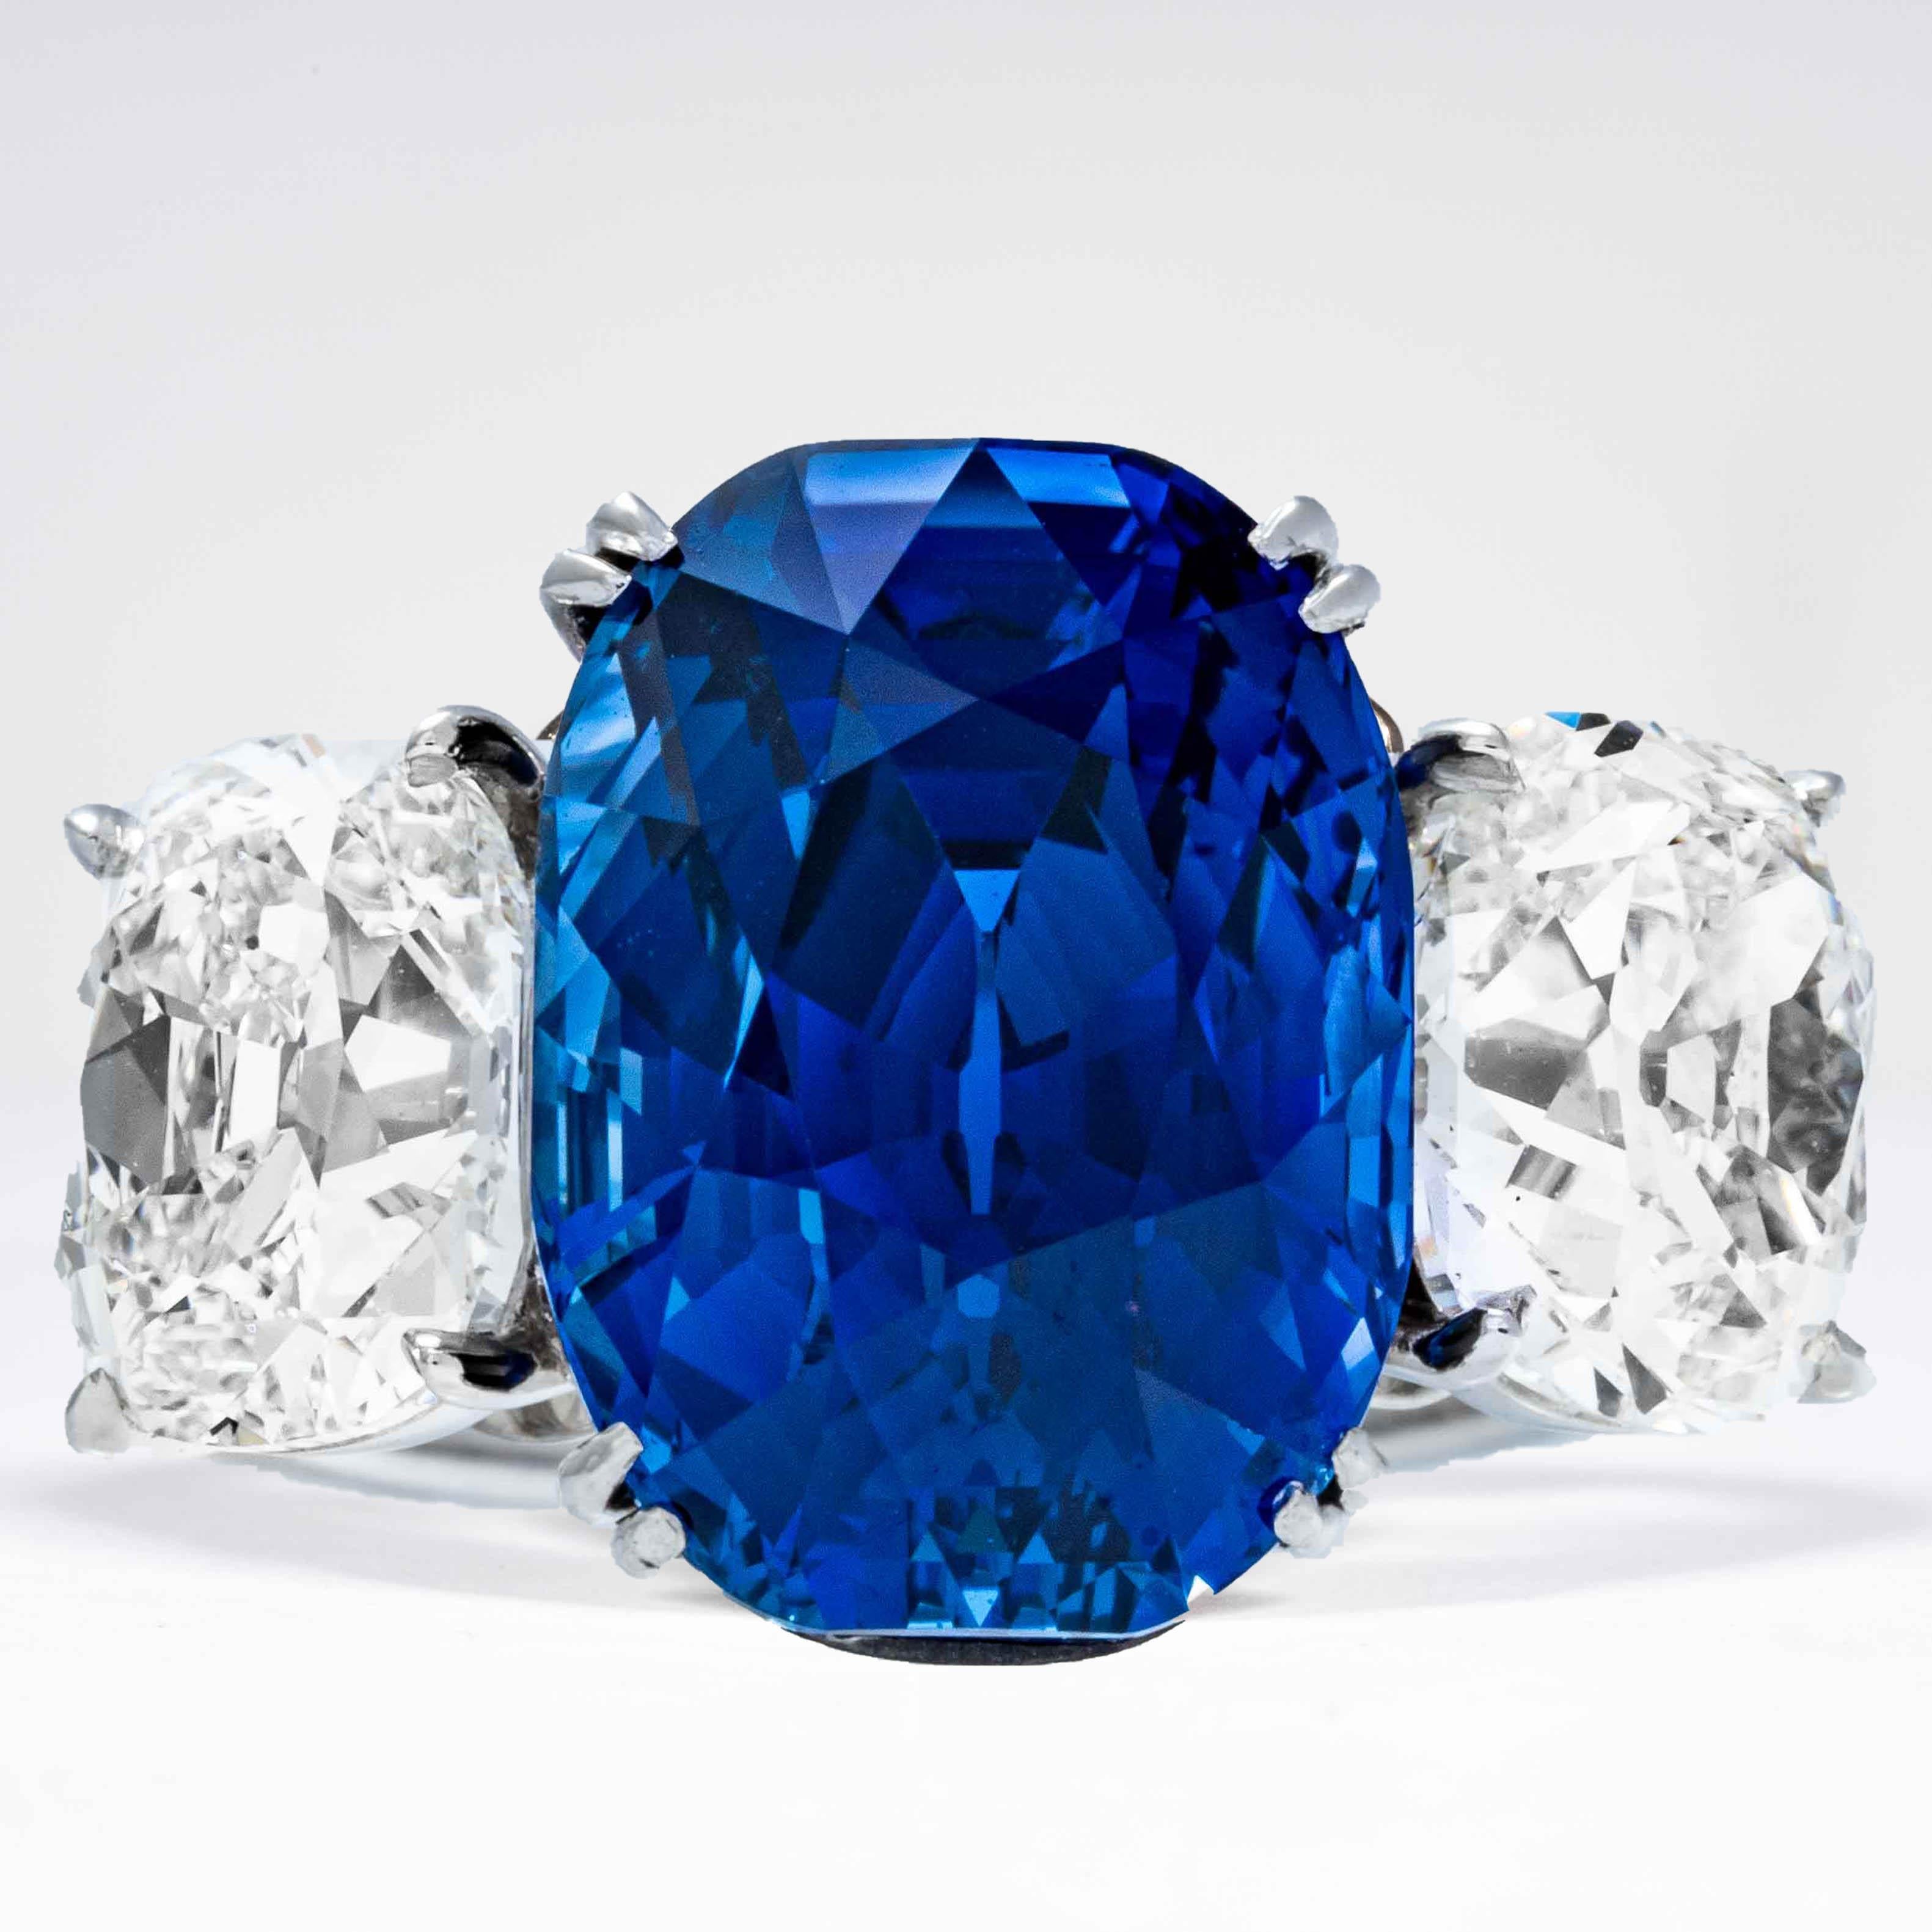 Shreve, Crump & Low is proud to offer this important sapphire and diamond ring. Where shall we look for an apt analogy for the 